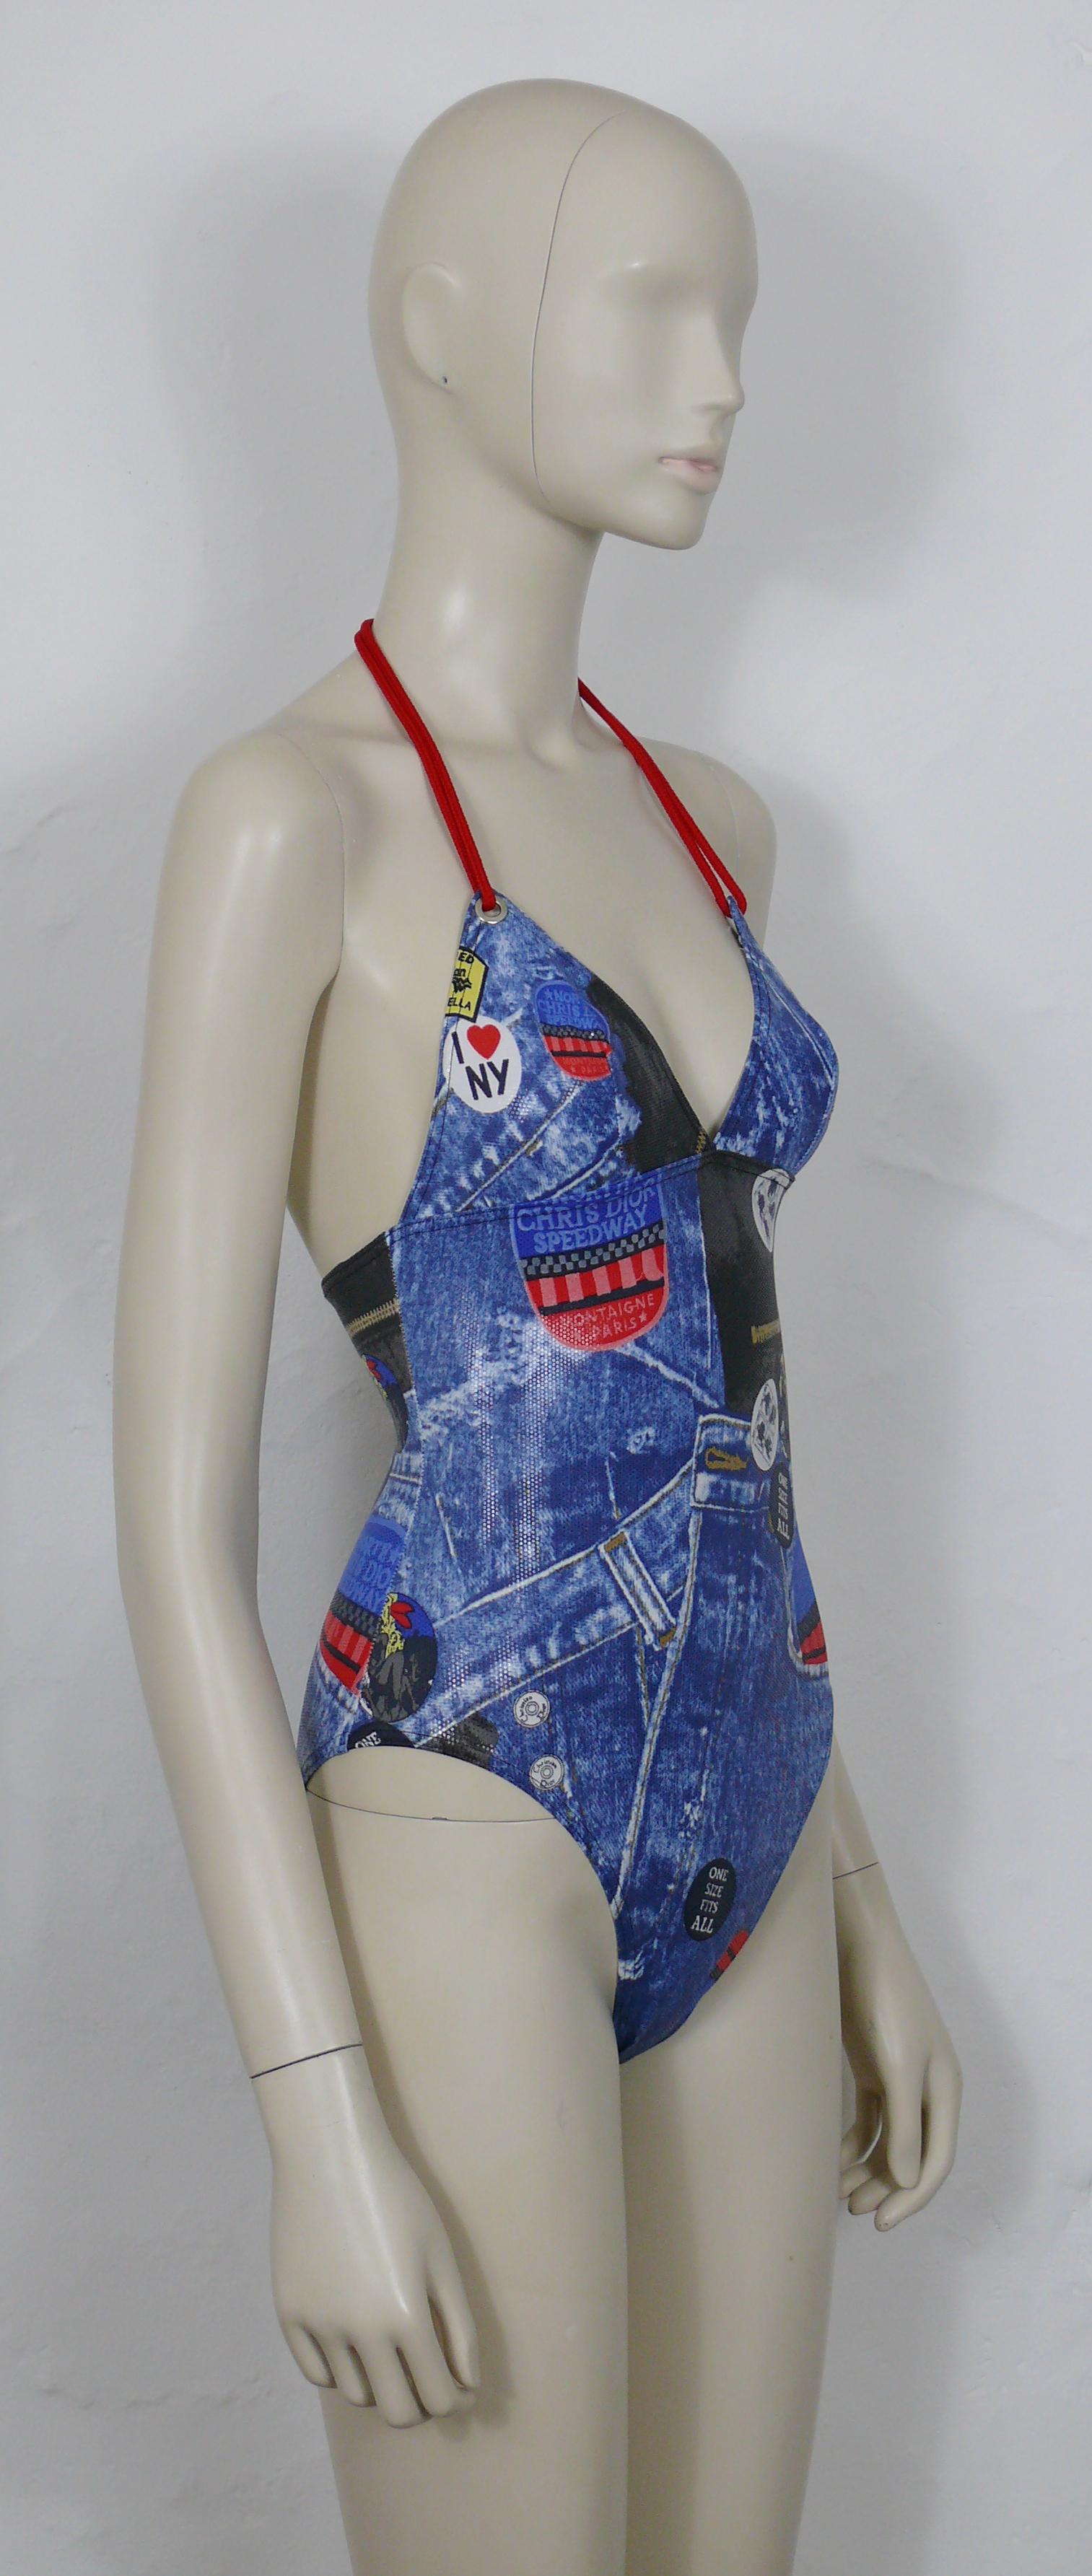 CHRISTIAN DIOR vintage shiny wet look MISS DIORELLA one-piece swimsuit featuring a denim trompe l'oeil print and patches.

Adjustable ties at neck red ropes.

Label reads CHRISTIAN DIOR.
Made in France.

Size tag reads : FR 38 / EUR 36 / INT